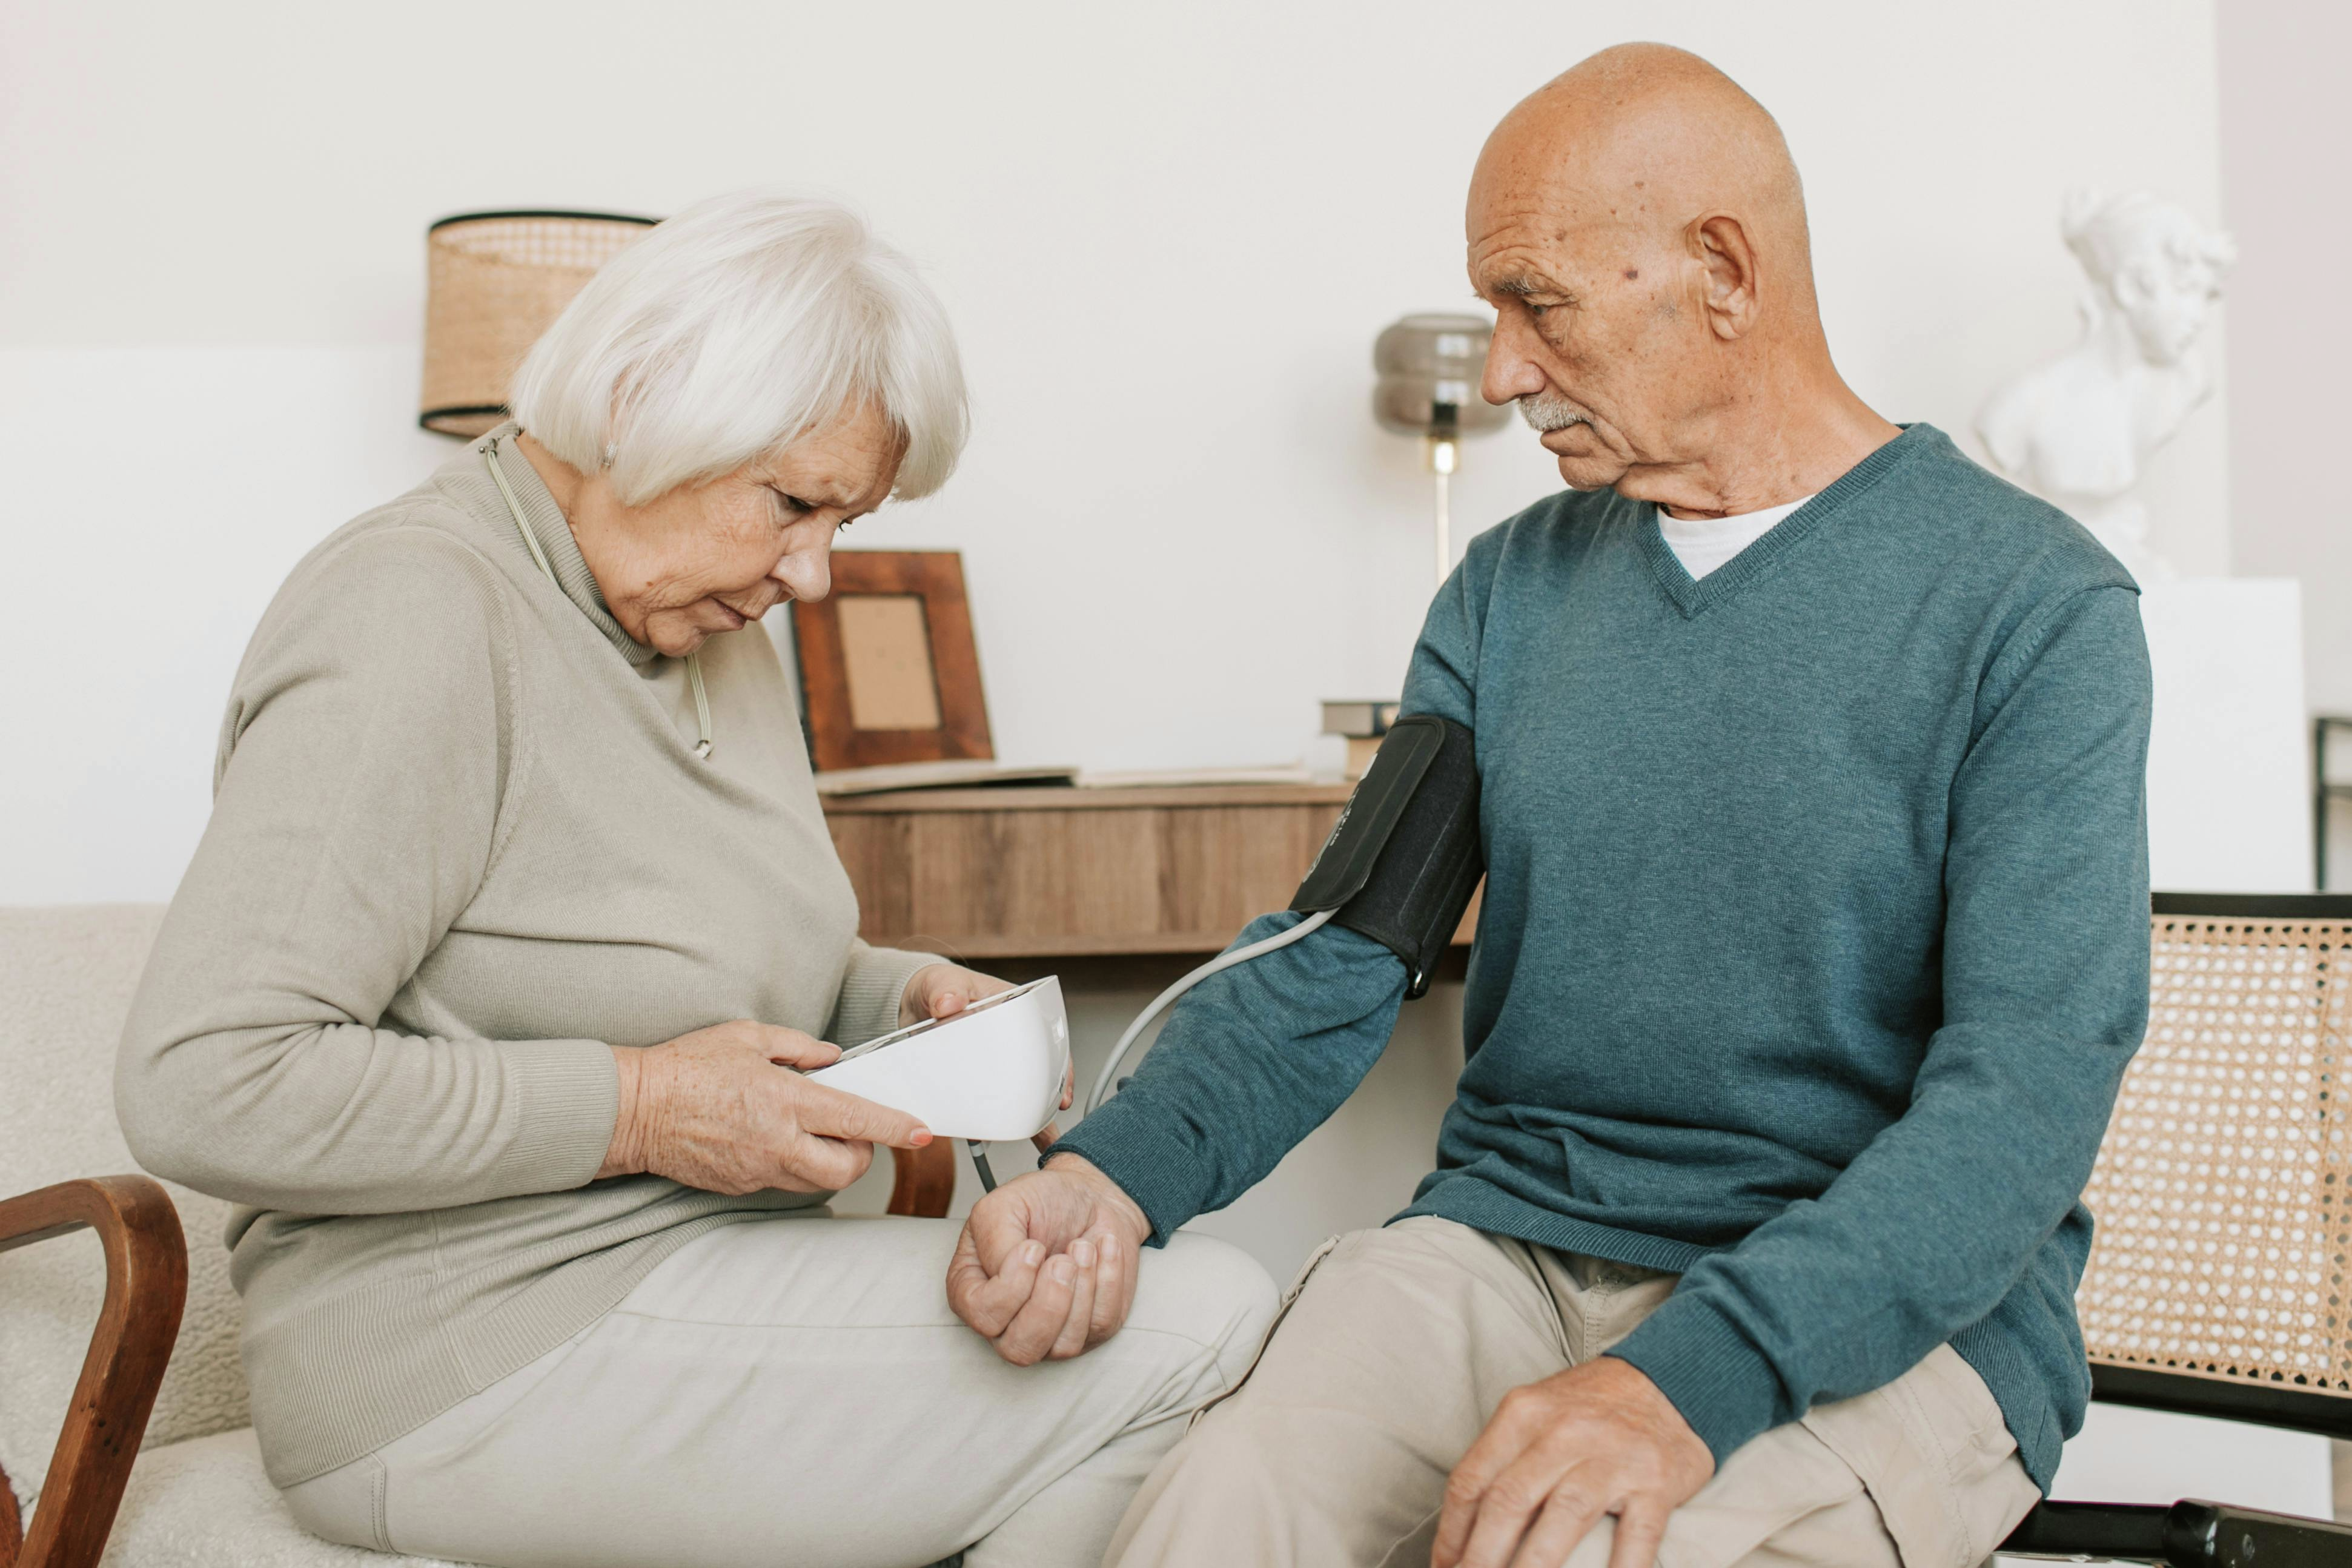 Are some real estate agents using nefarious tactics on seniors?